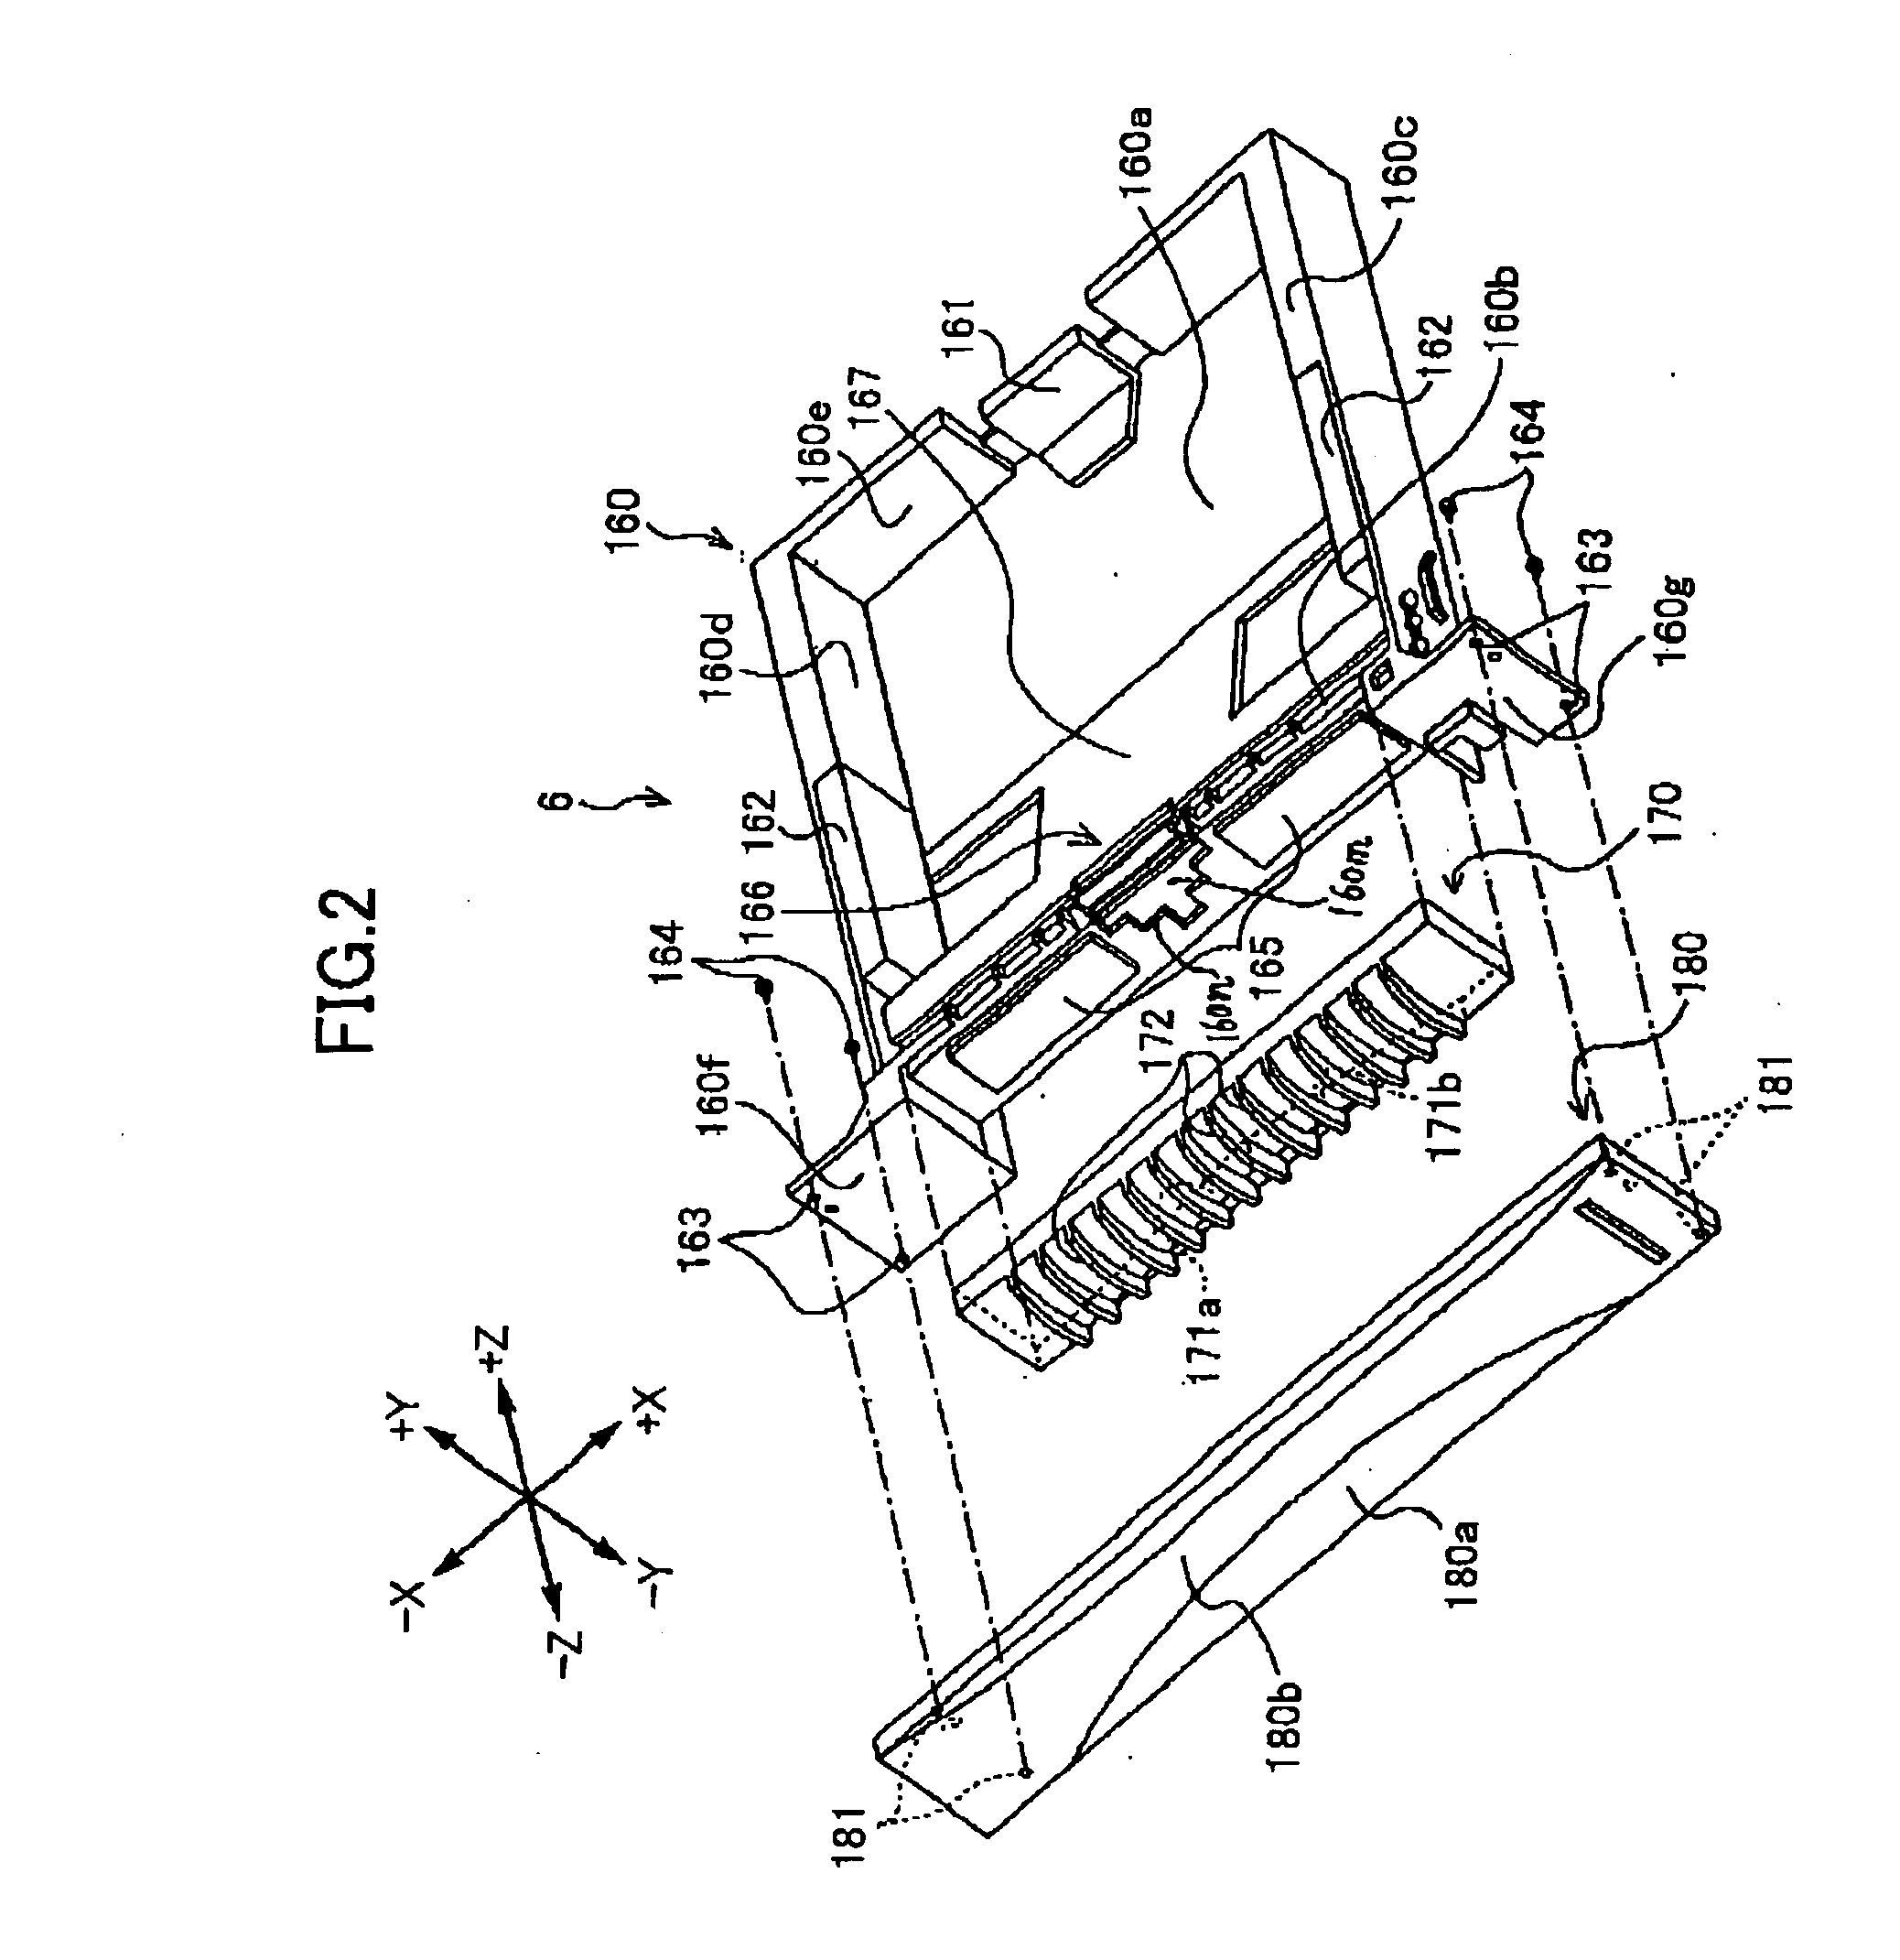 Paper supply cassette for an image forming device